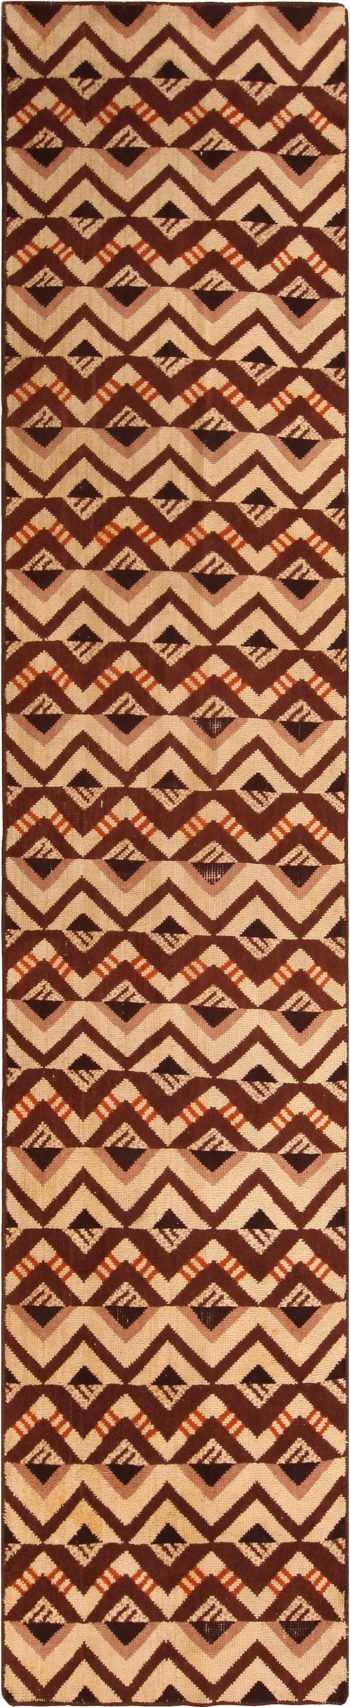 Geometric Vintage French Art Deco Runner Rug 70969 by Nazmiyal Antique Rugs